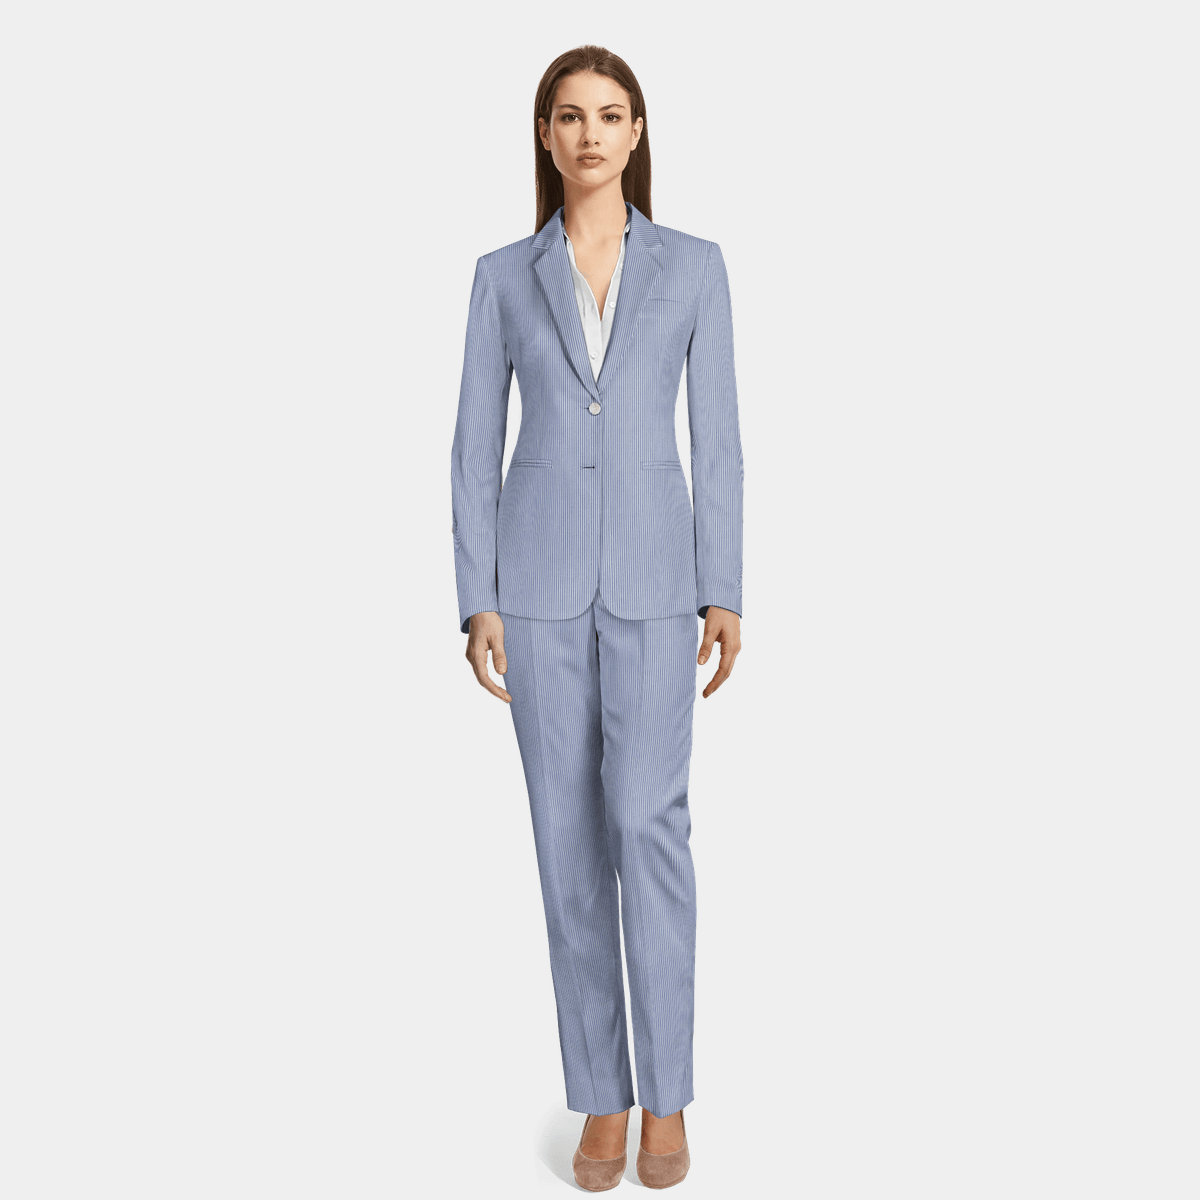 Women's Trouser Suits Online - Sumissura